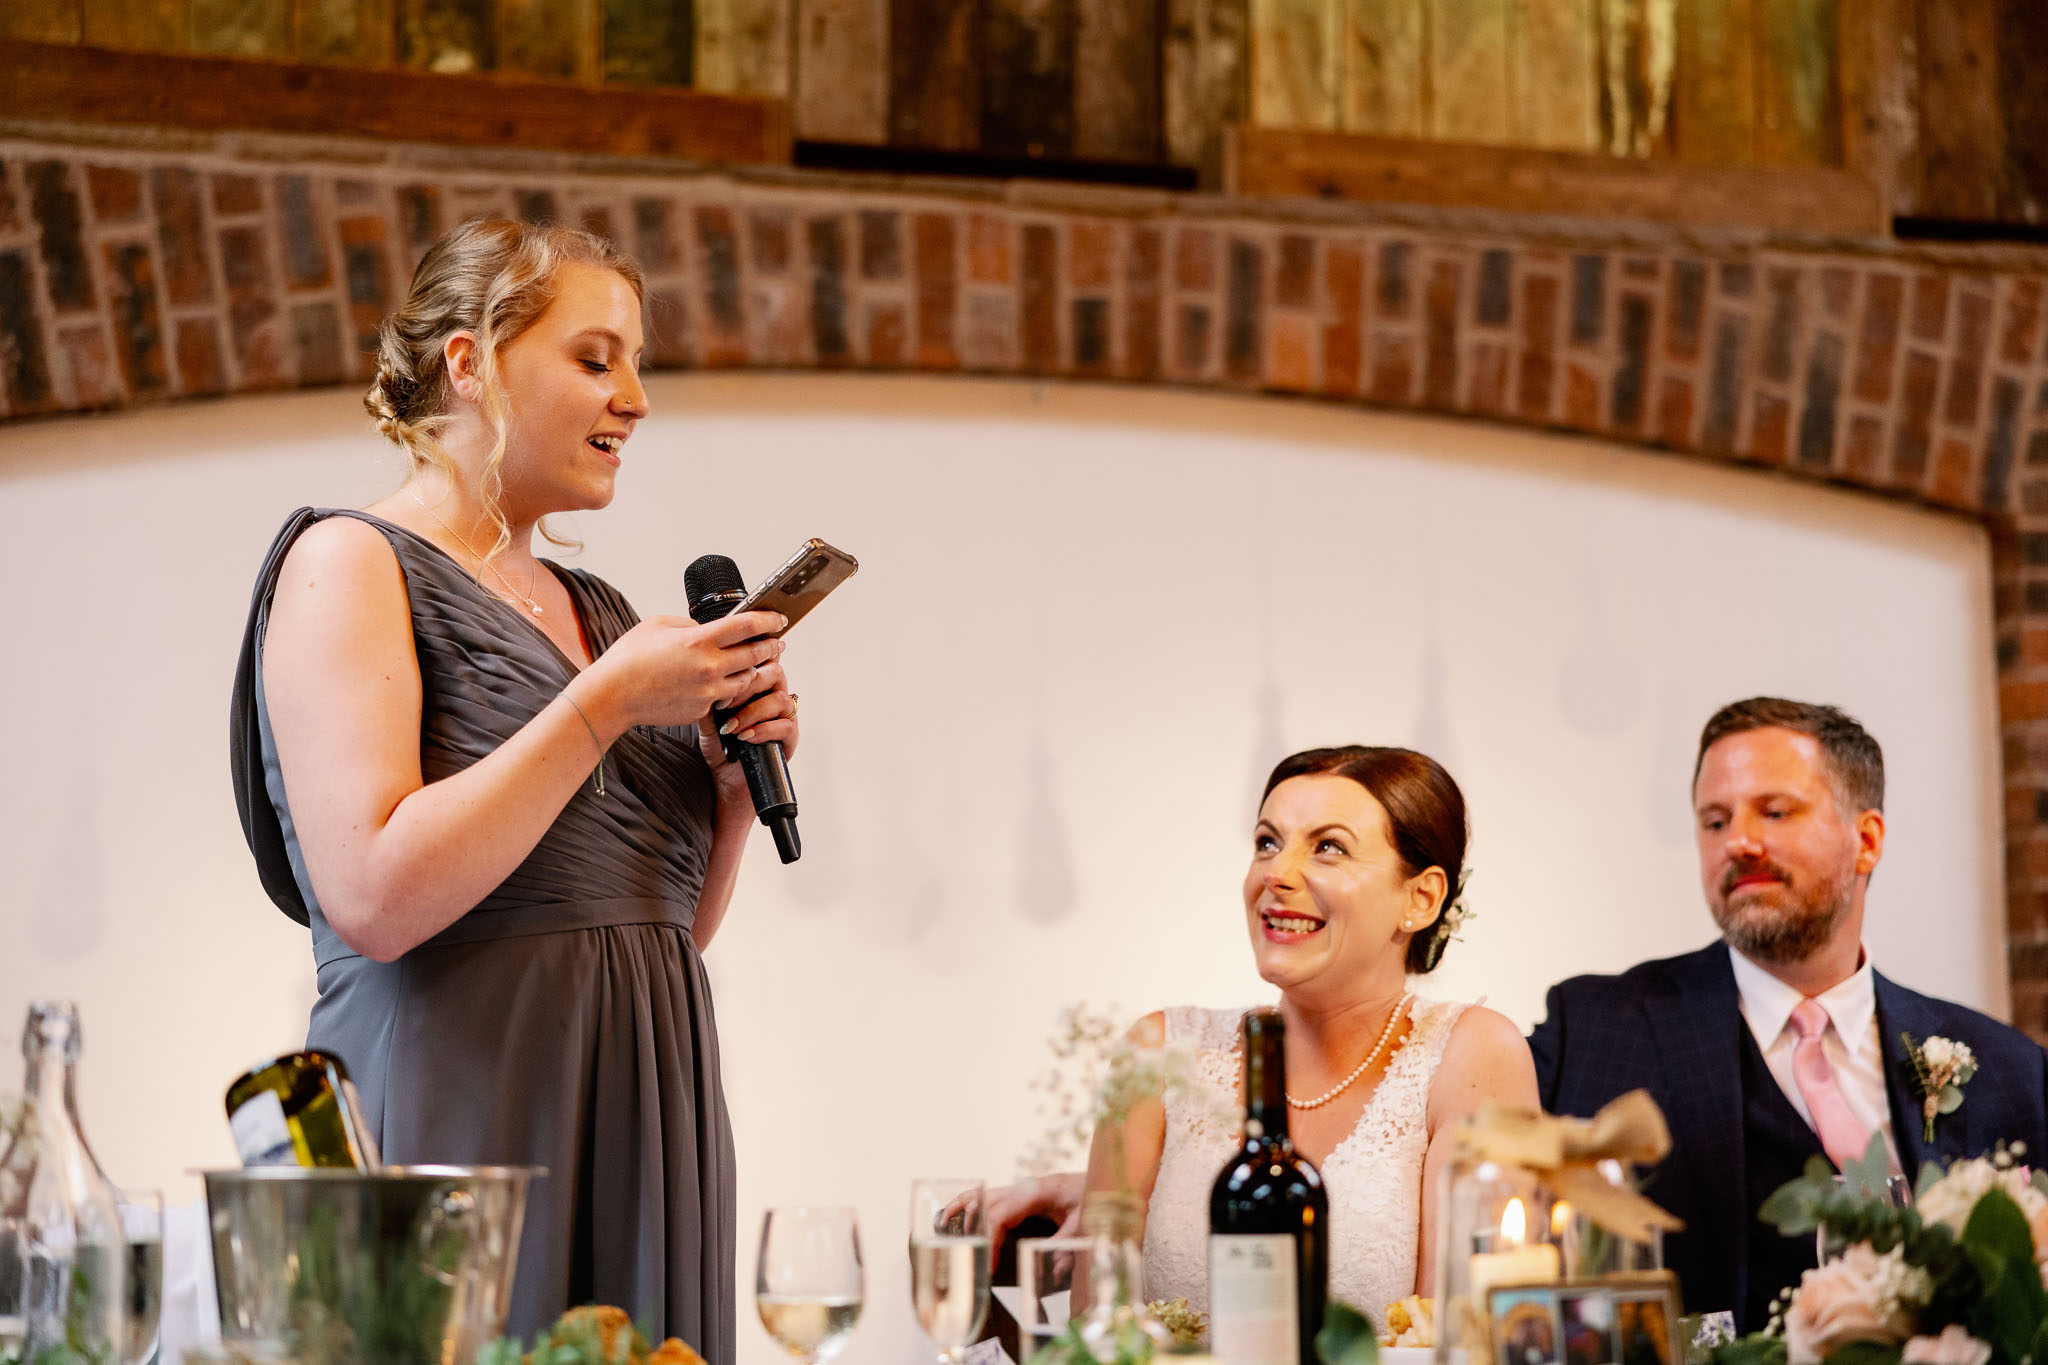 Women making the speeches at a wedding